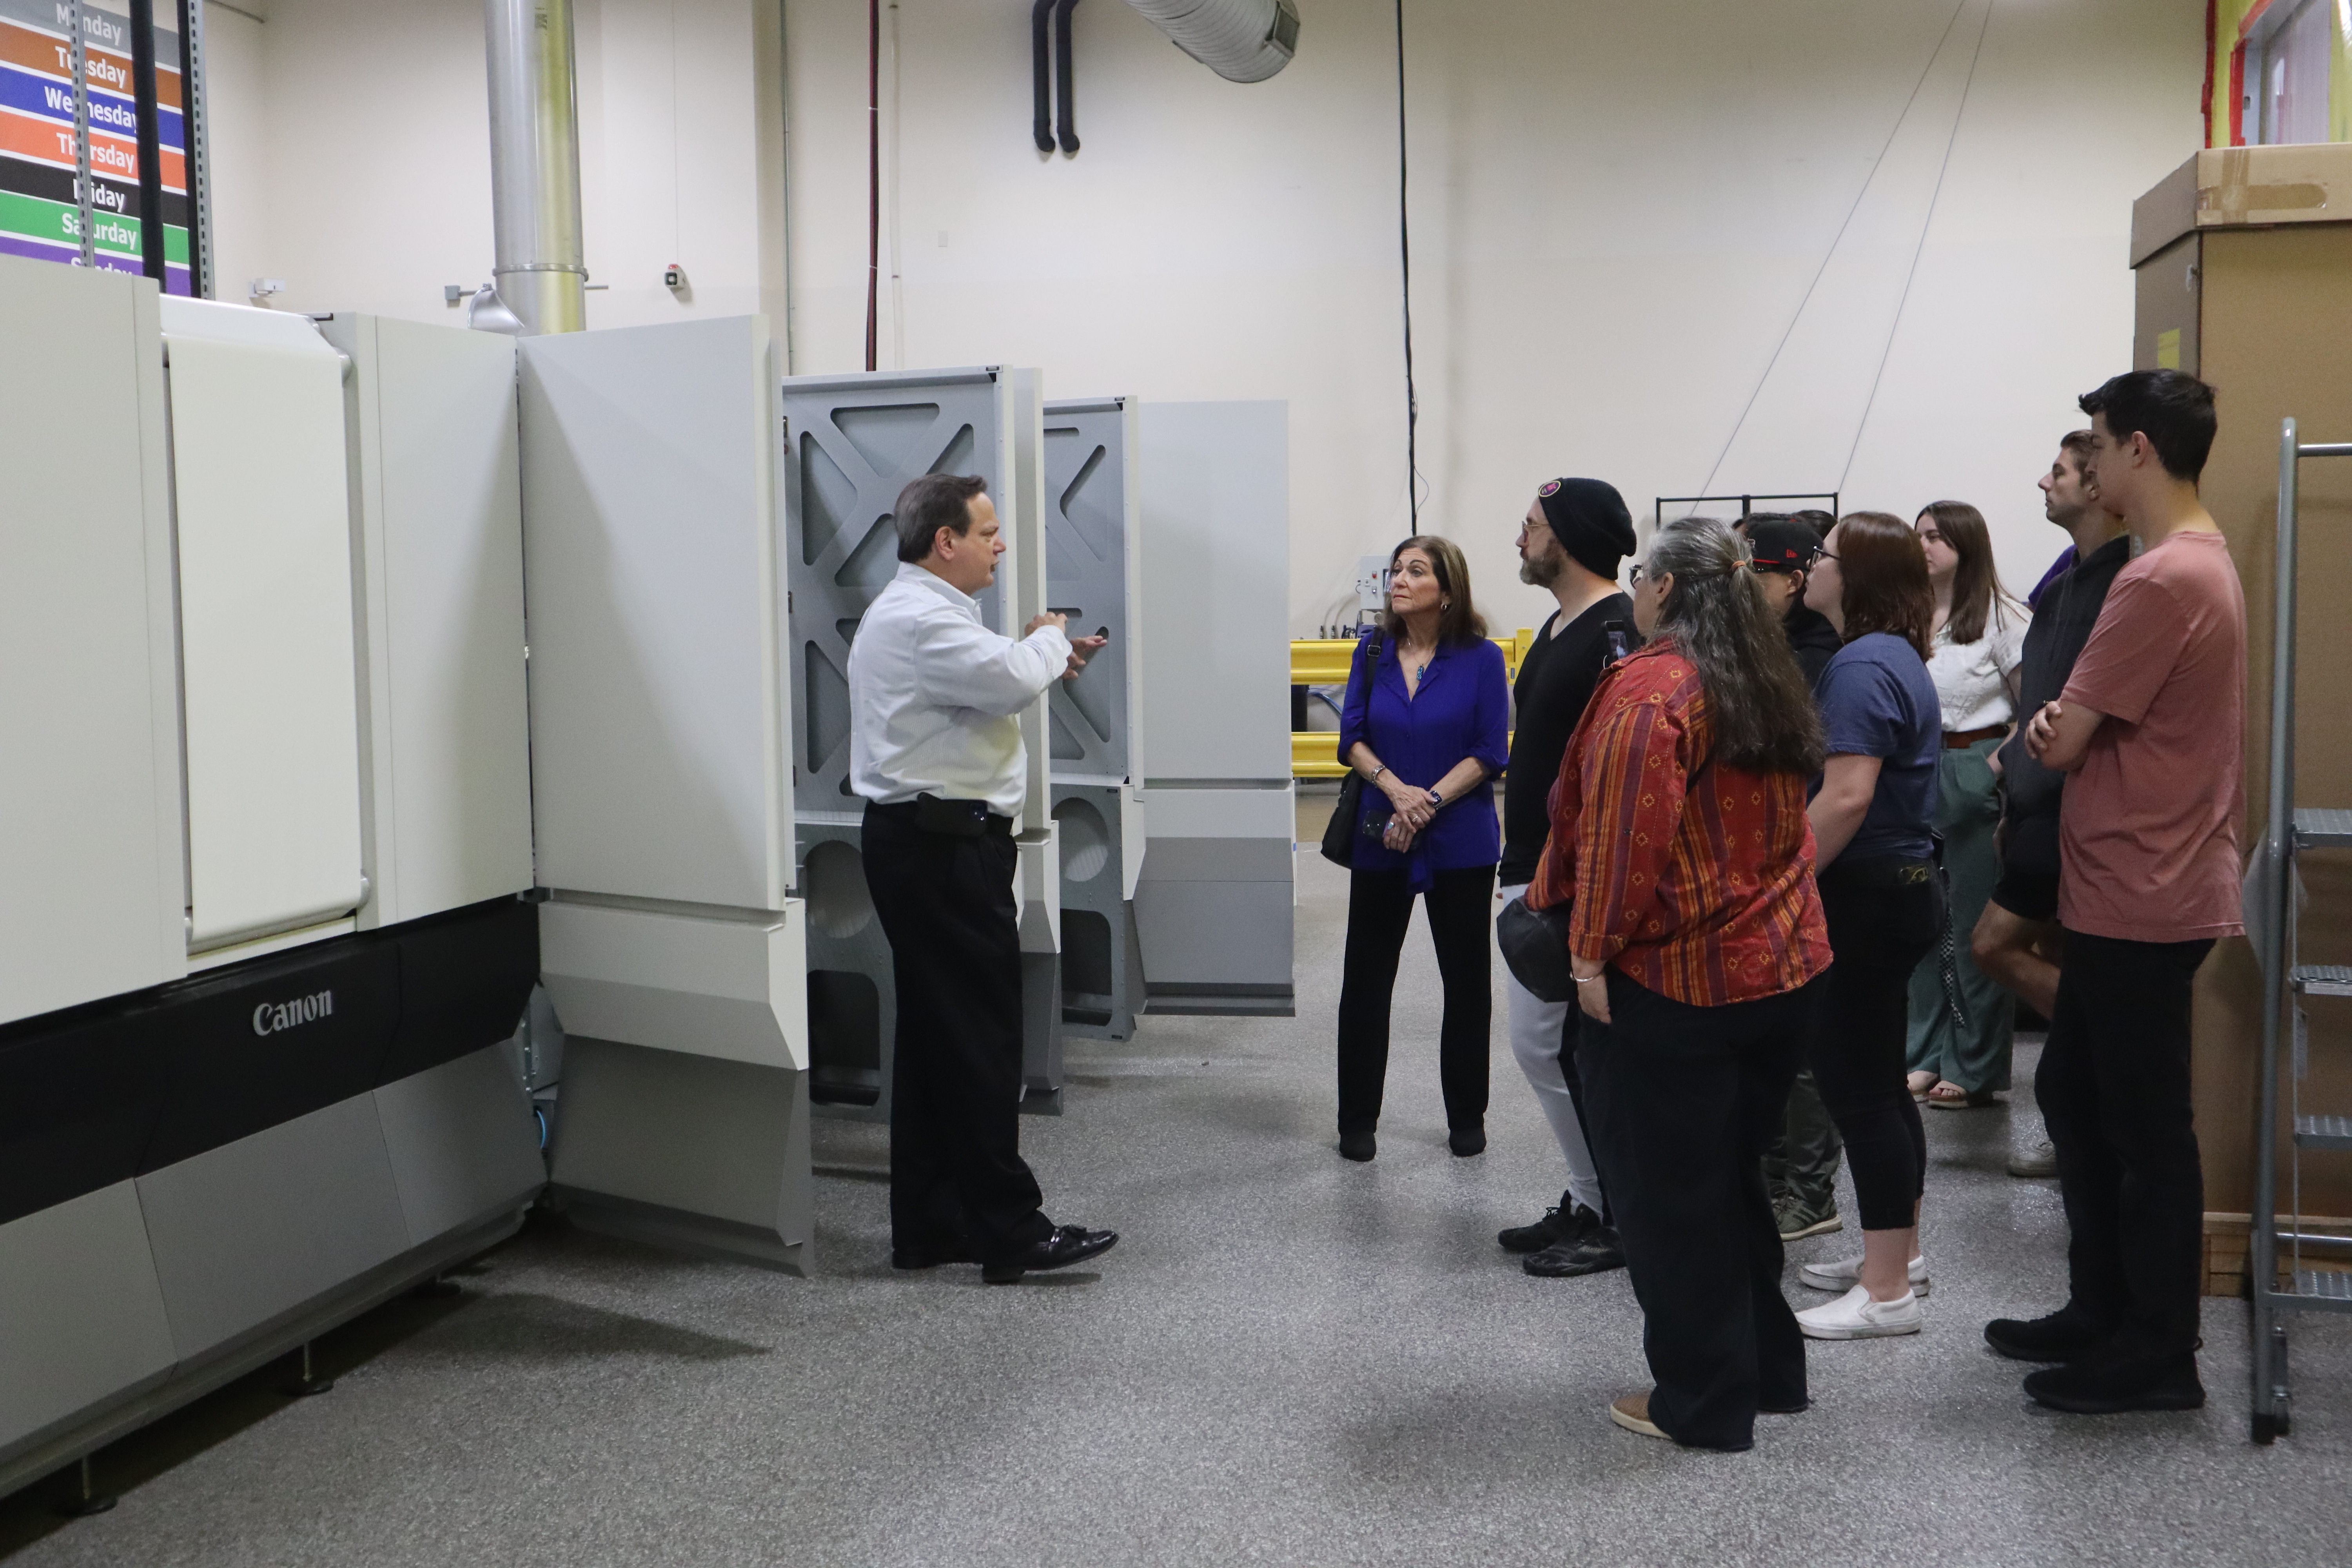 Canon Solutions America customer District Photo has assisted the University Inkjet Program’s educational mission by hosting field trips.